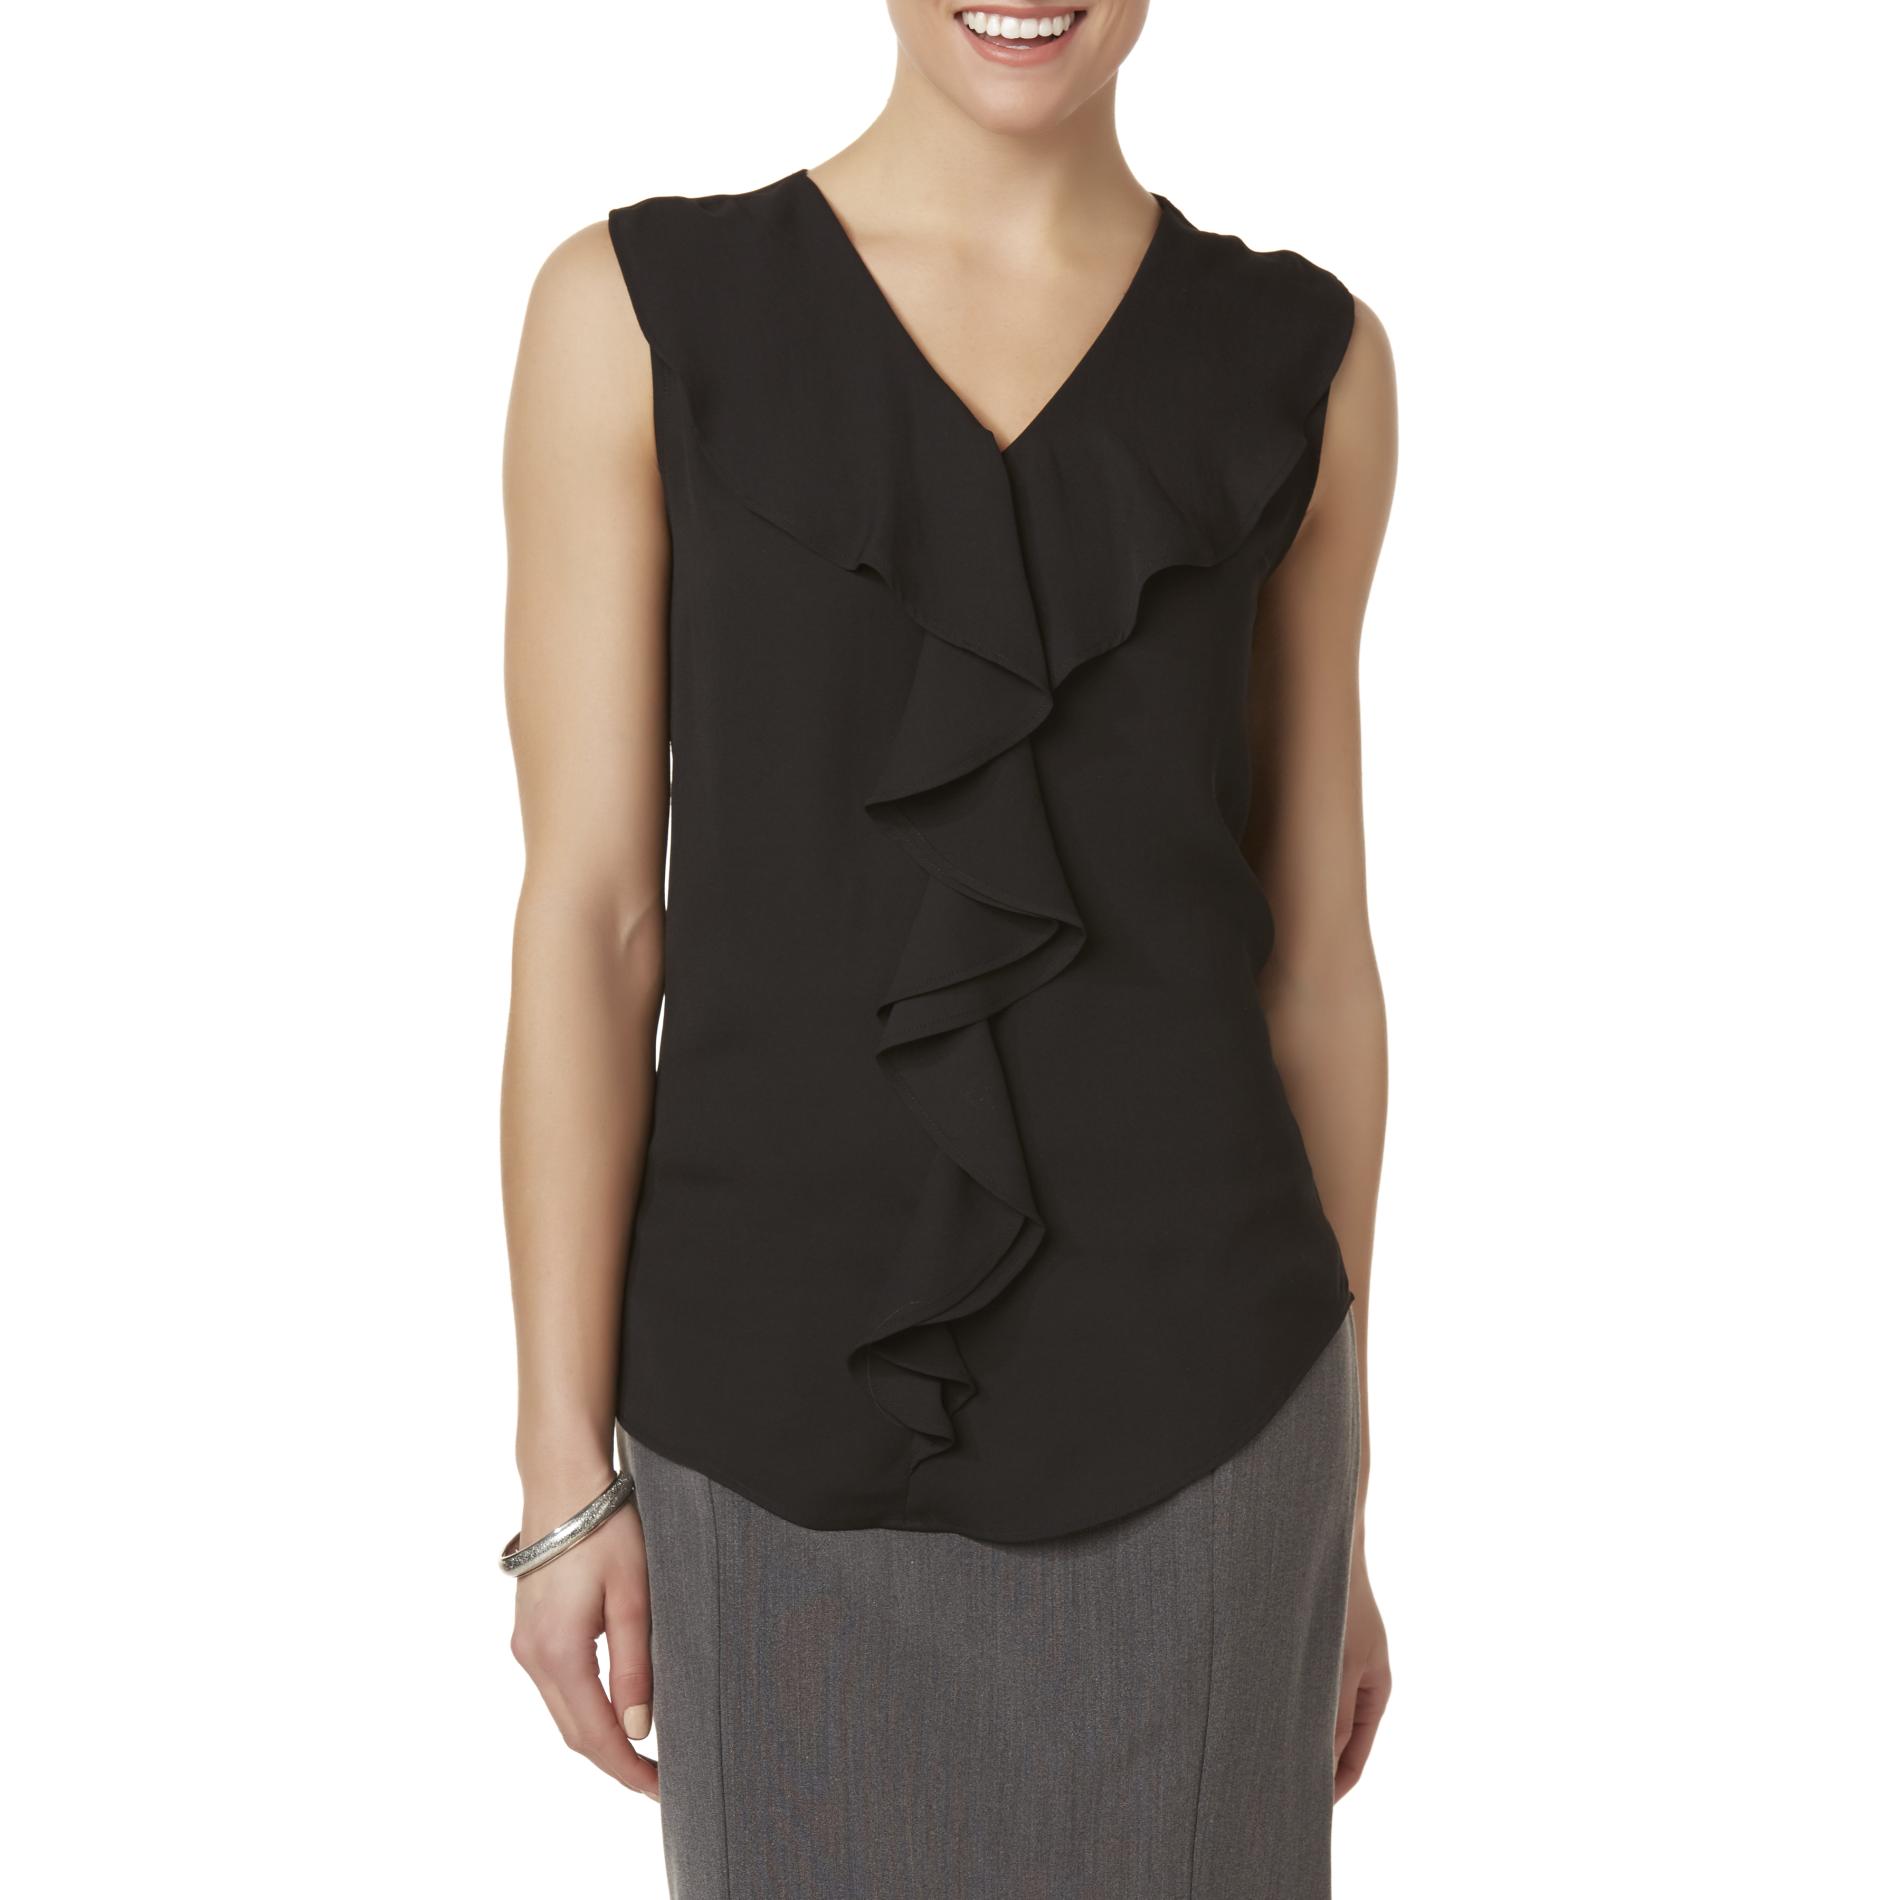 Simply Styled Women's Sleeveless Blouse